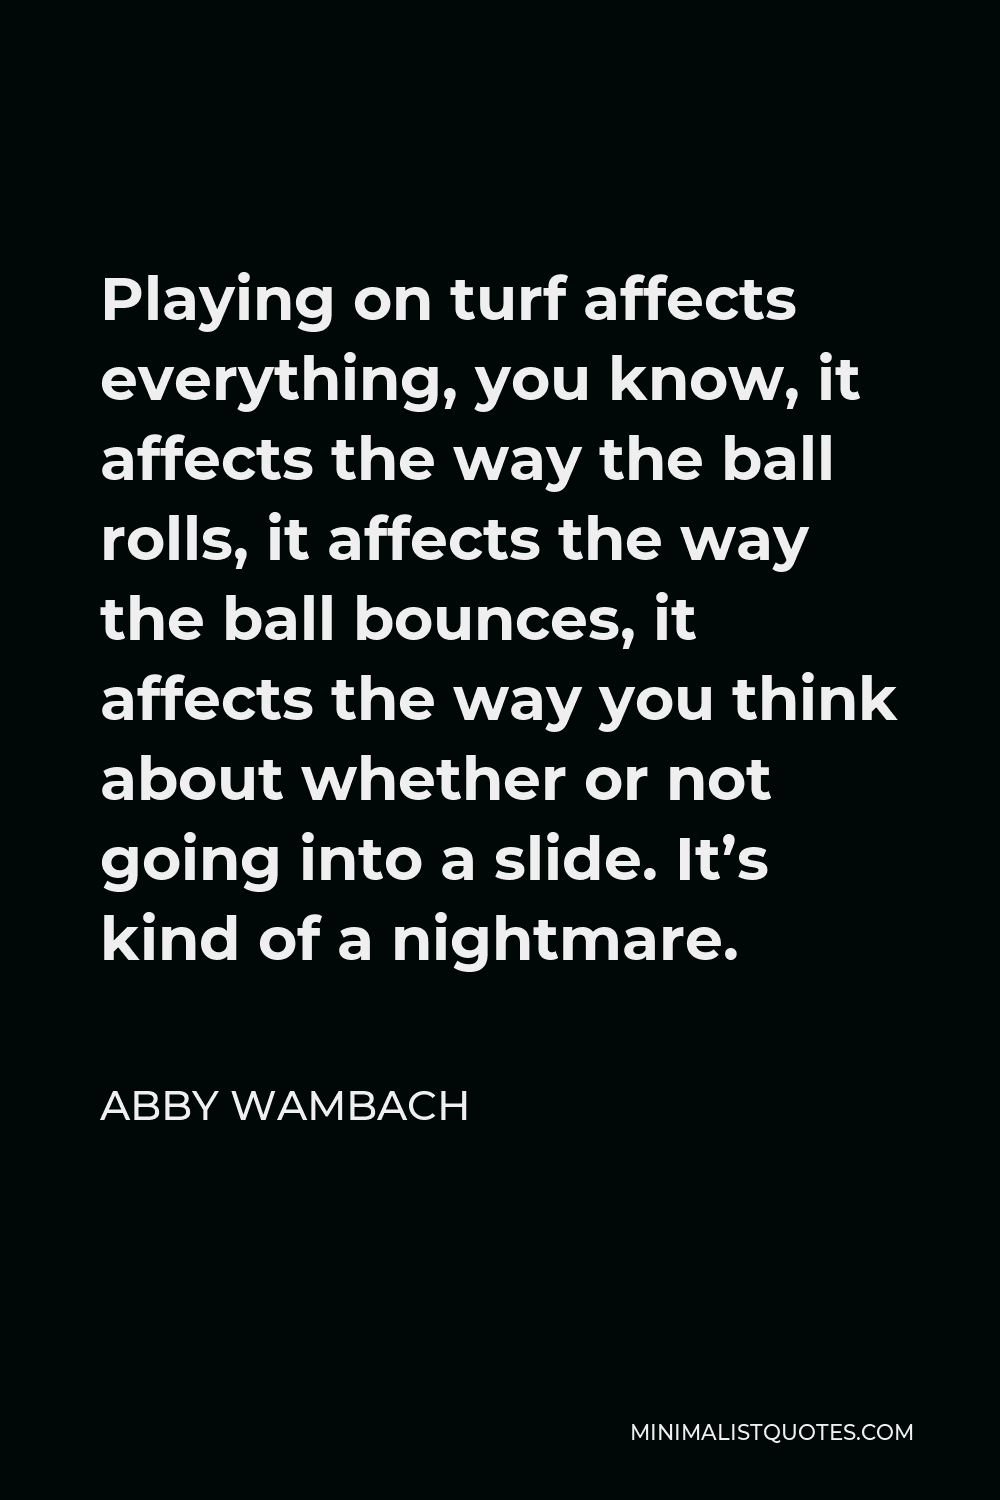 Abby Wambach Quote - Playing on turf affects everything, you know, it affects the way the ball rolls, it affects the way the ball bounces, it affects the way you think about whether or not going into a slide. It’s kind of a nightmare.